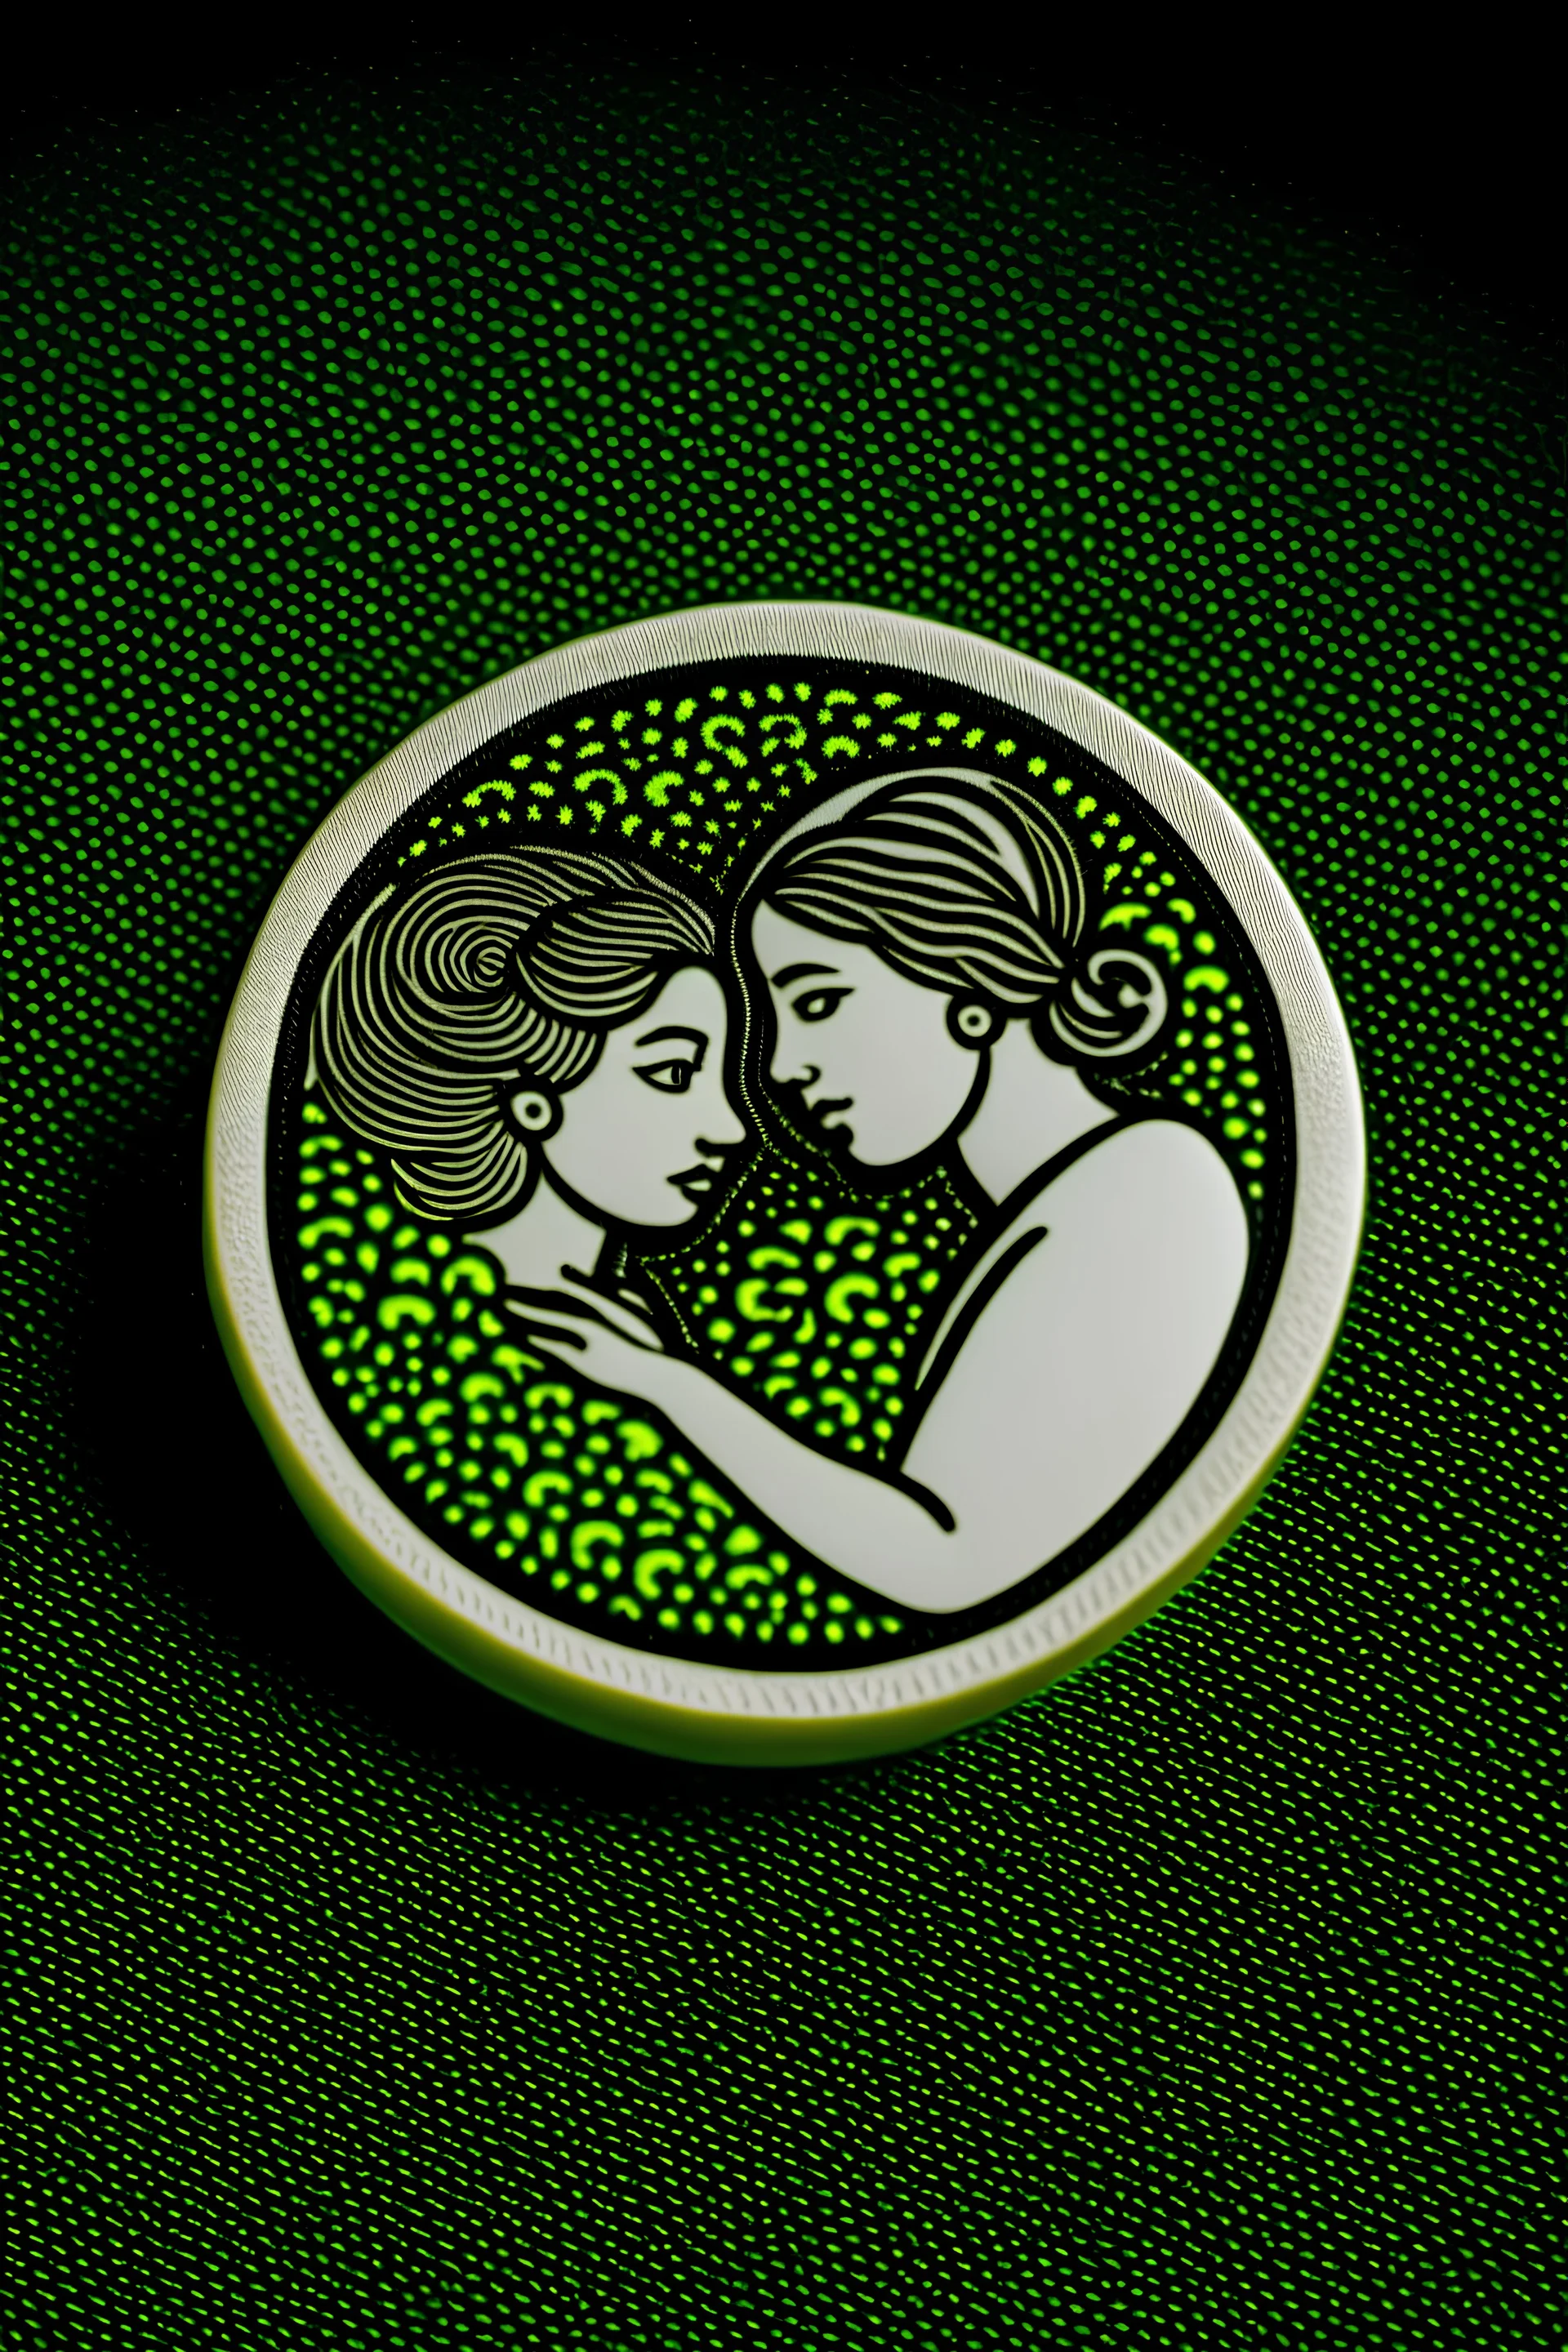 A design printed on a brooch that expresses the fight against gender-based violence in one colour